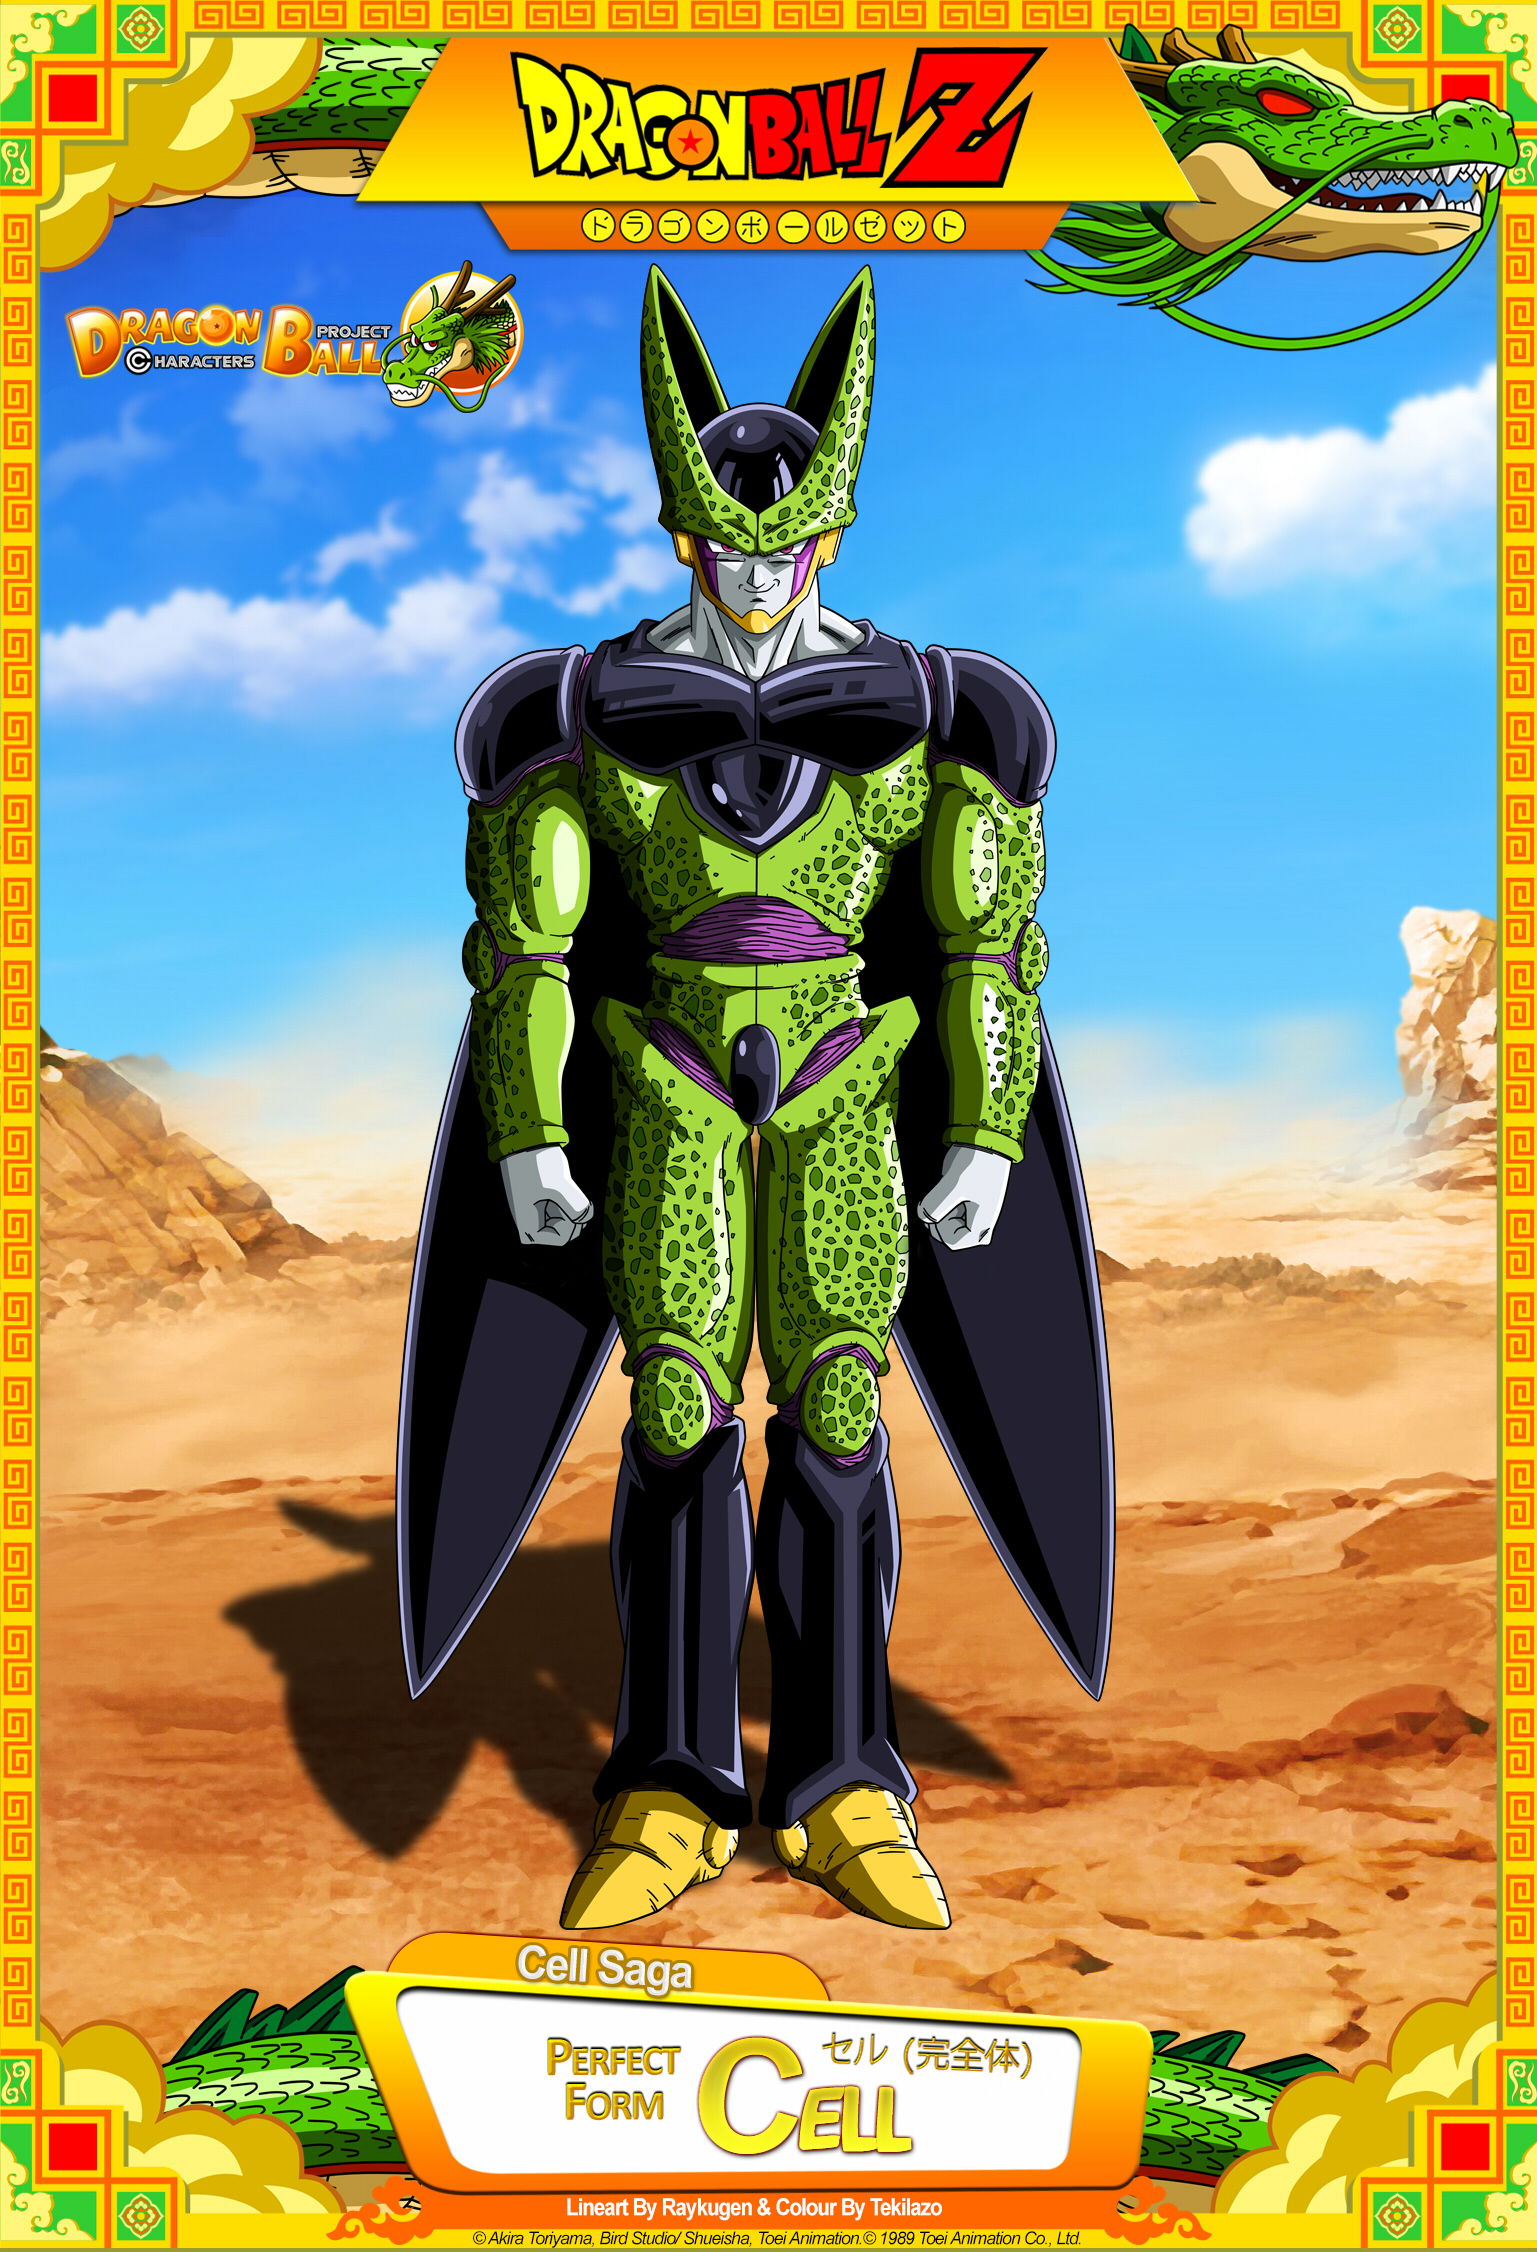 Dragon Ball Z - Cell (Perfect Form) by DBCProject on DeviantArt